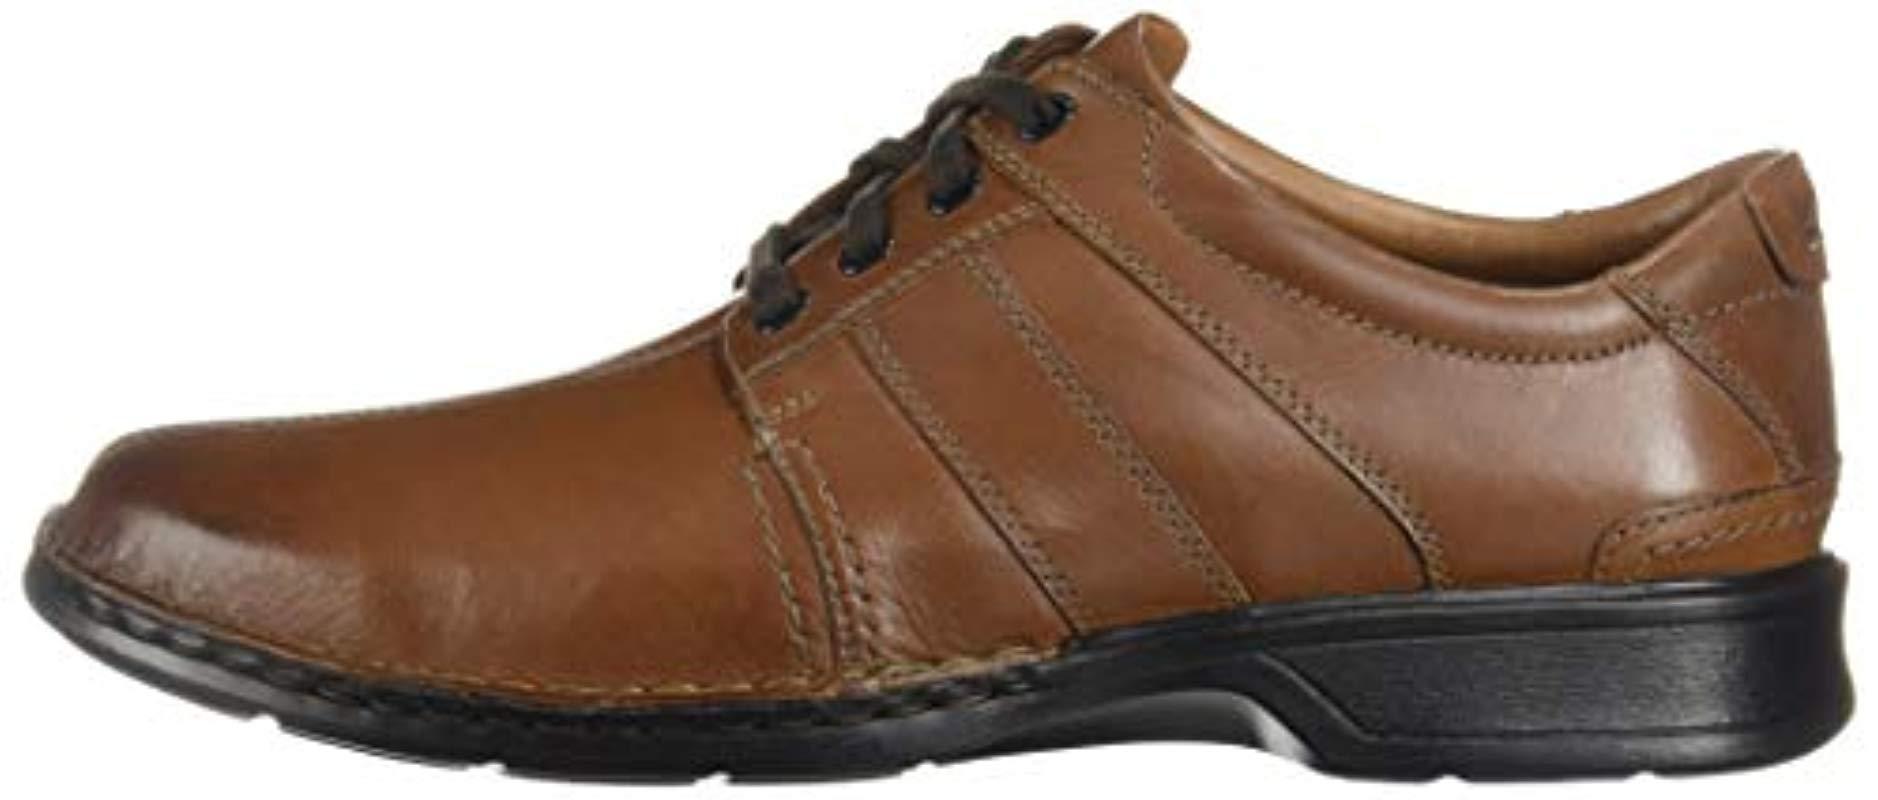 Clarks Leather Touareg Vibe Oxford in Brown Leather (Brown) for Men - Lyst